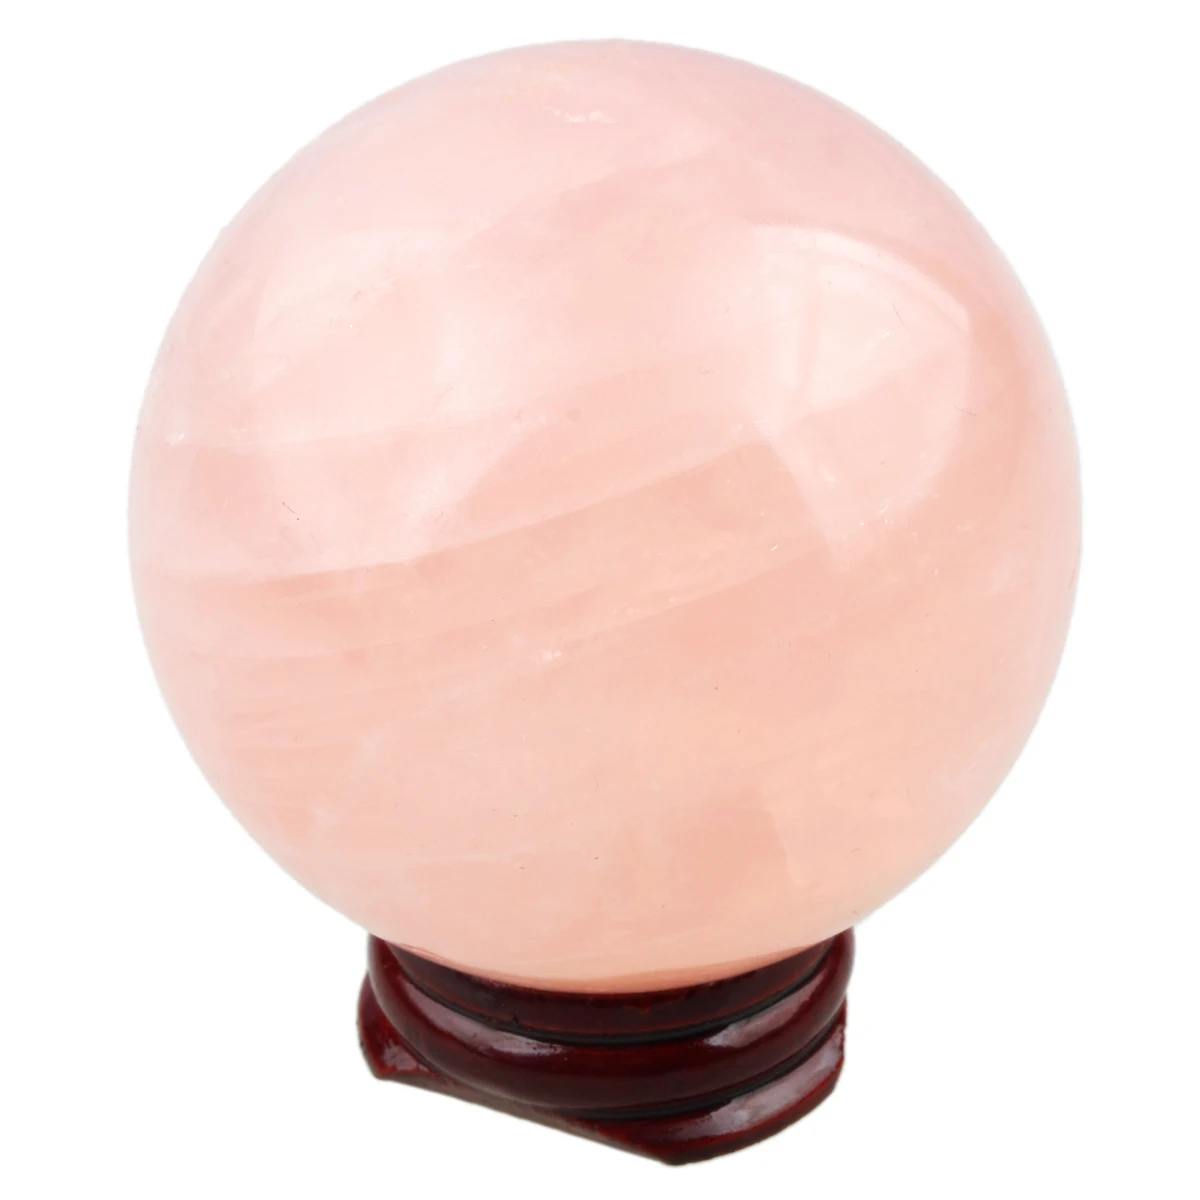 TUMBEELLUWA 60-65mm Natural Rose Quartz Sphere Crystal Ball With Wooden Stand Reiki Healing Wicca Chakra Stones Home Decoration | Украшения